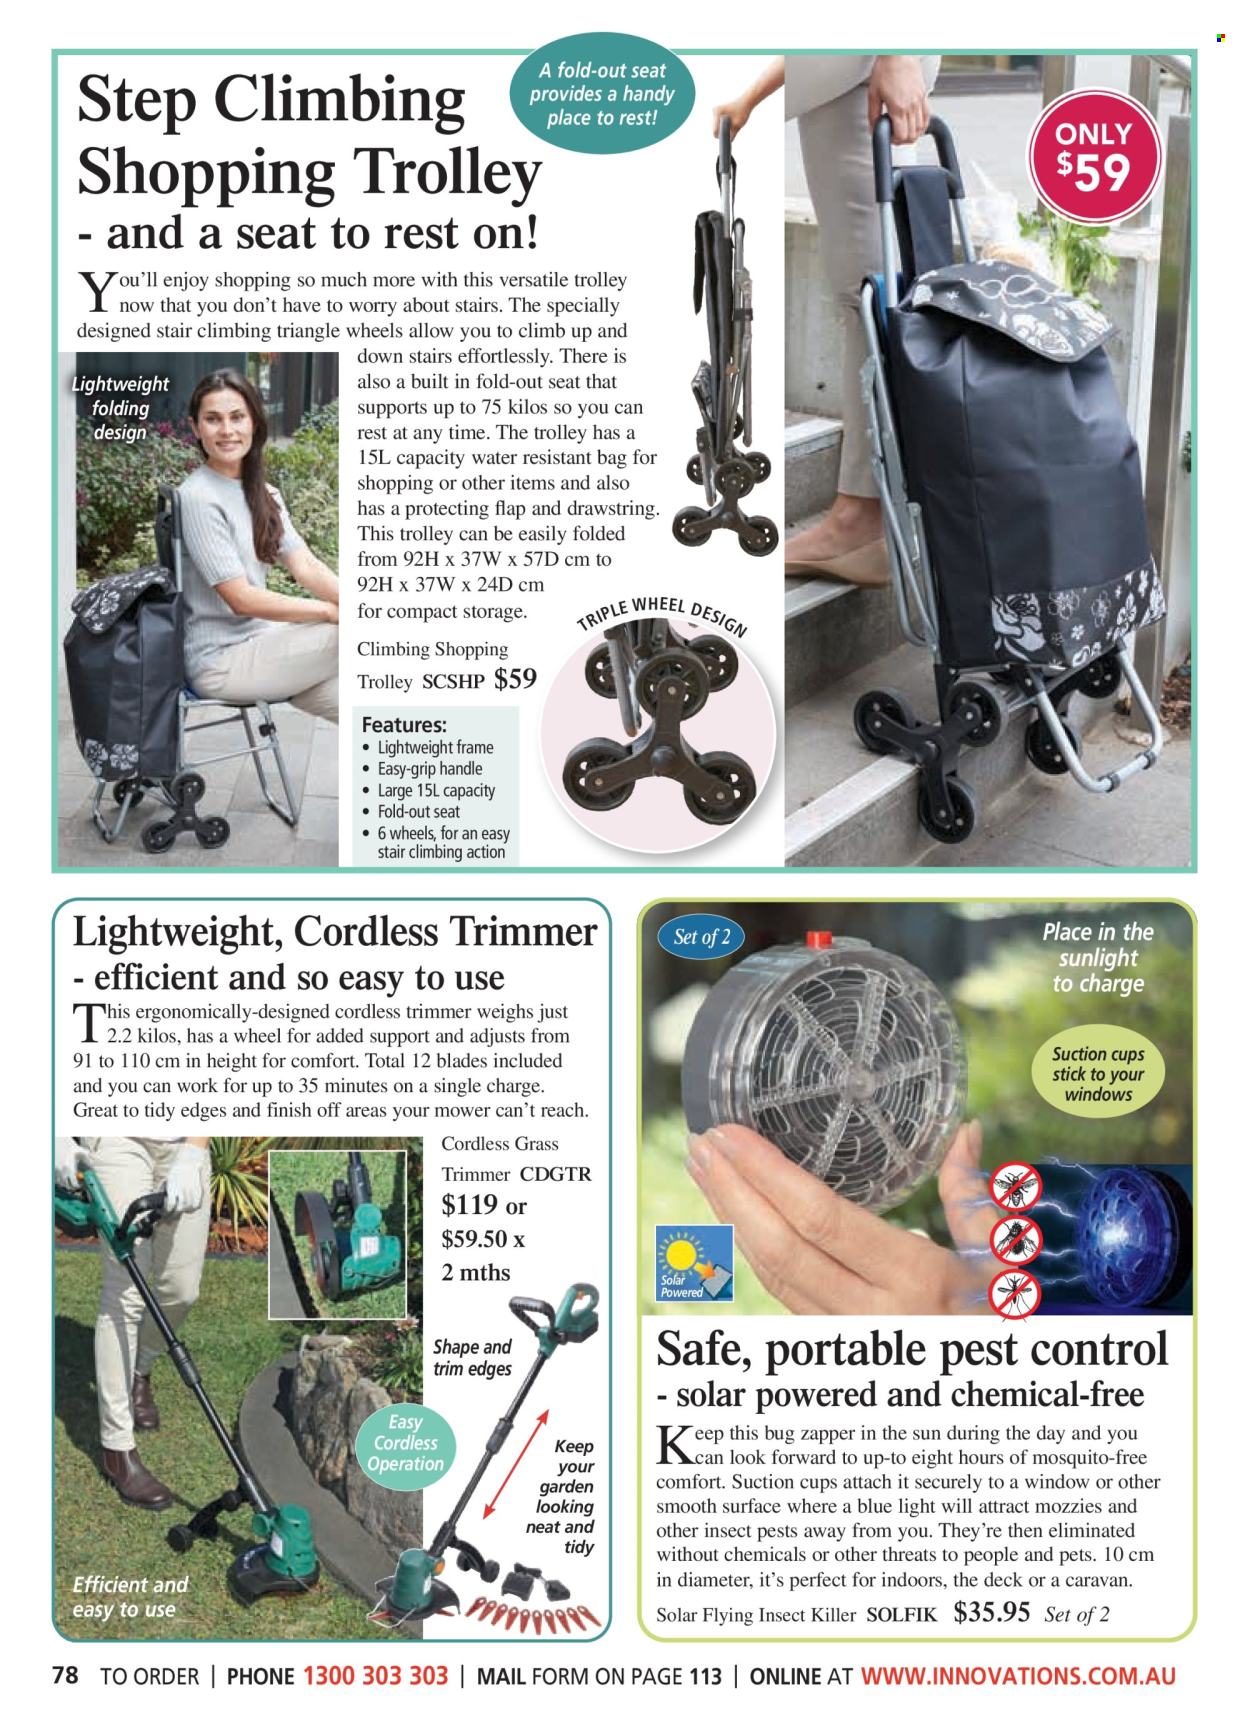 thumbnail - Innovations Catalogue - Sales products - trolley, suction cups, cup, bag, insect killer. Page 78.